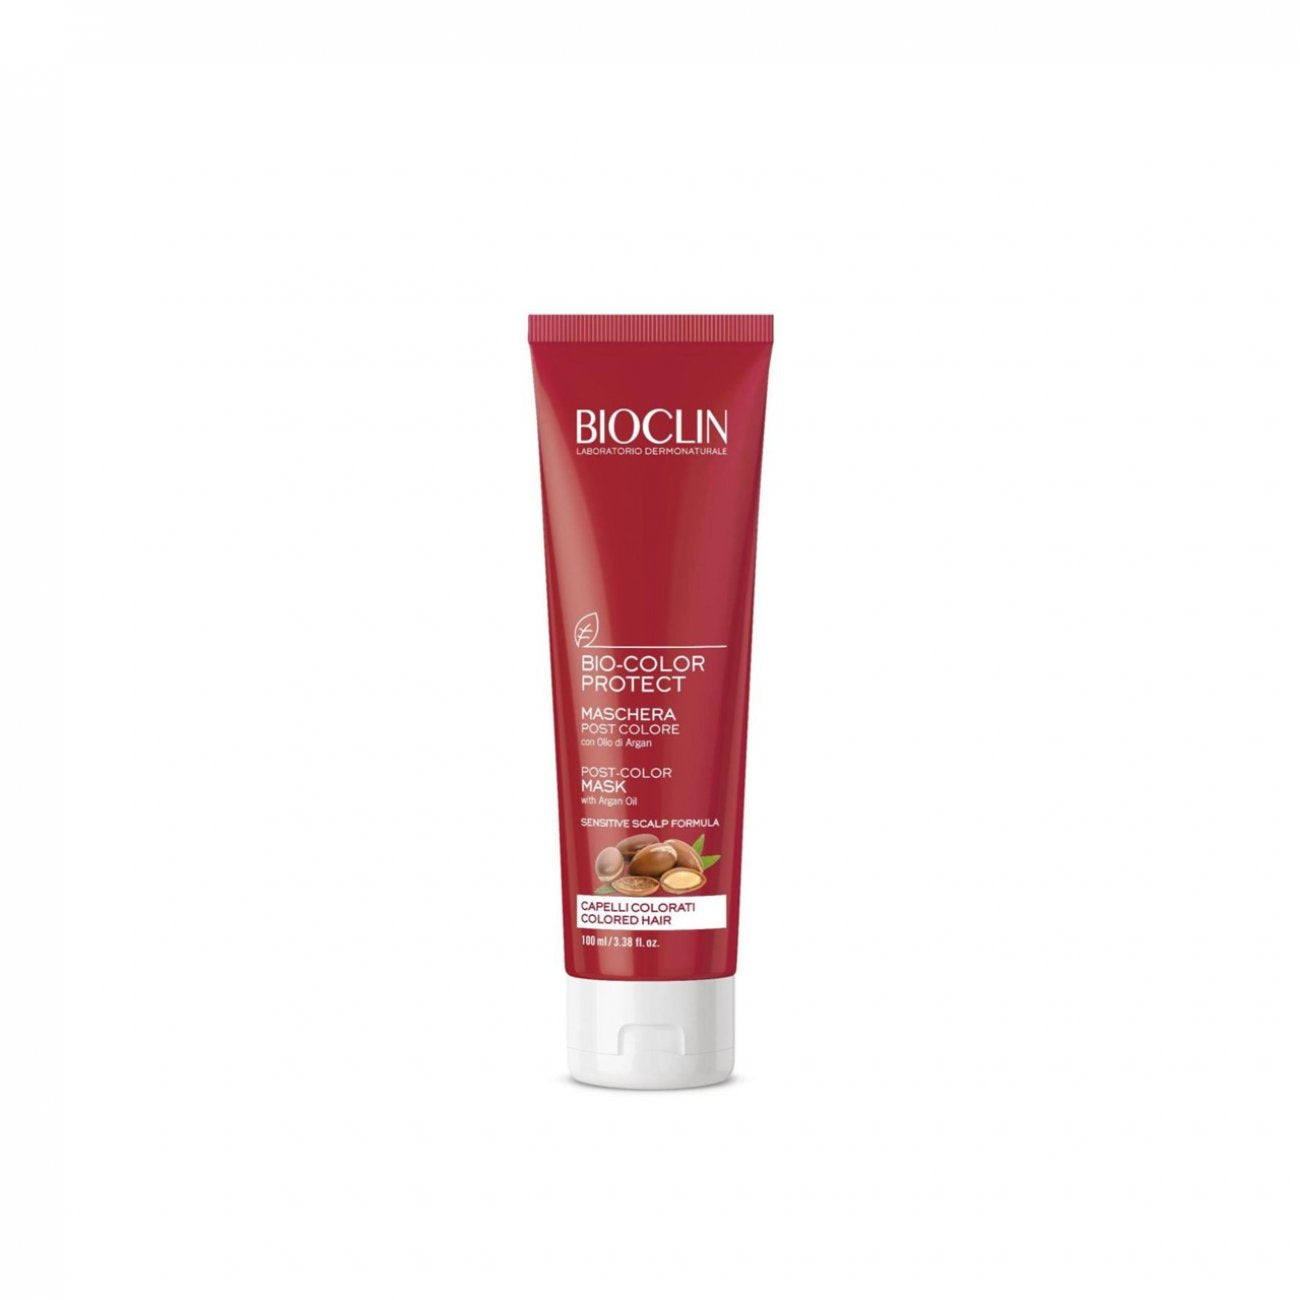 Bio-Color Protect Post-Color Mask Colored Hair 100ml